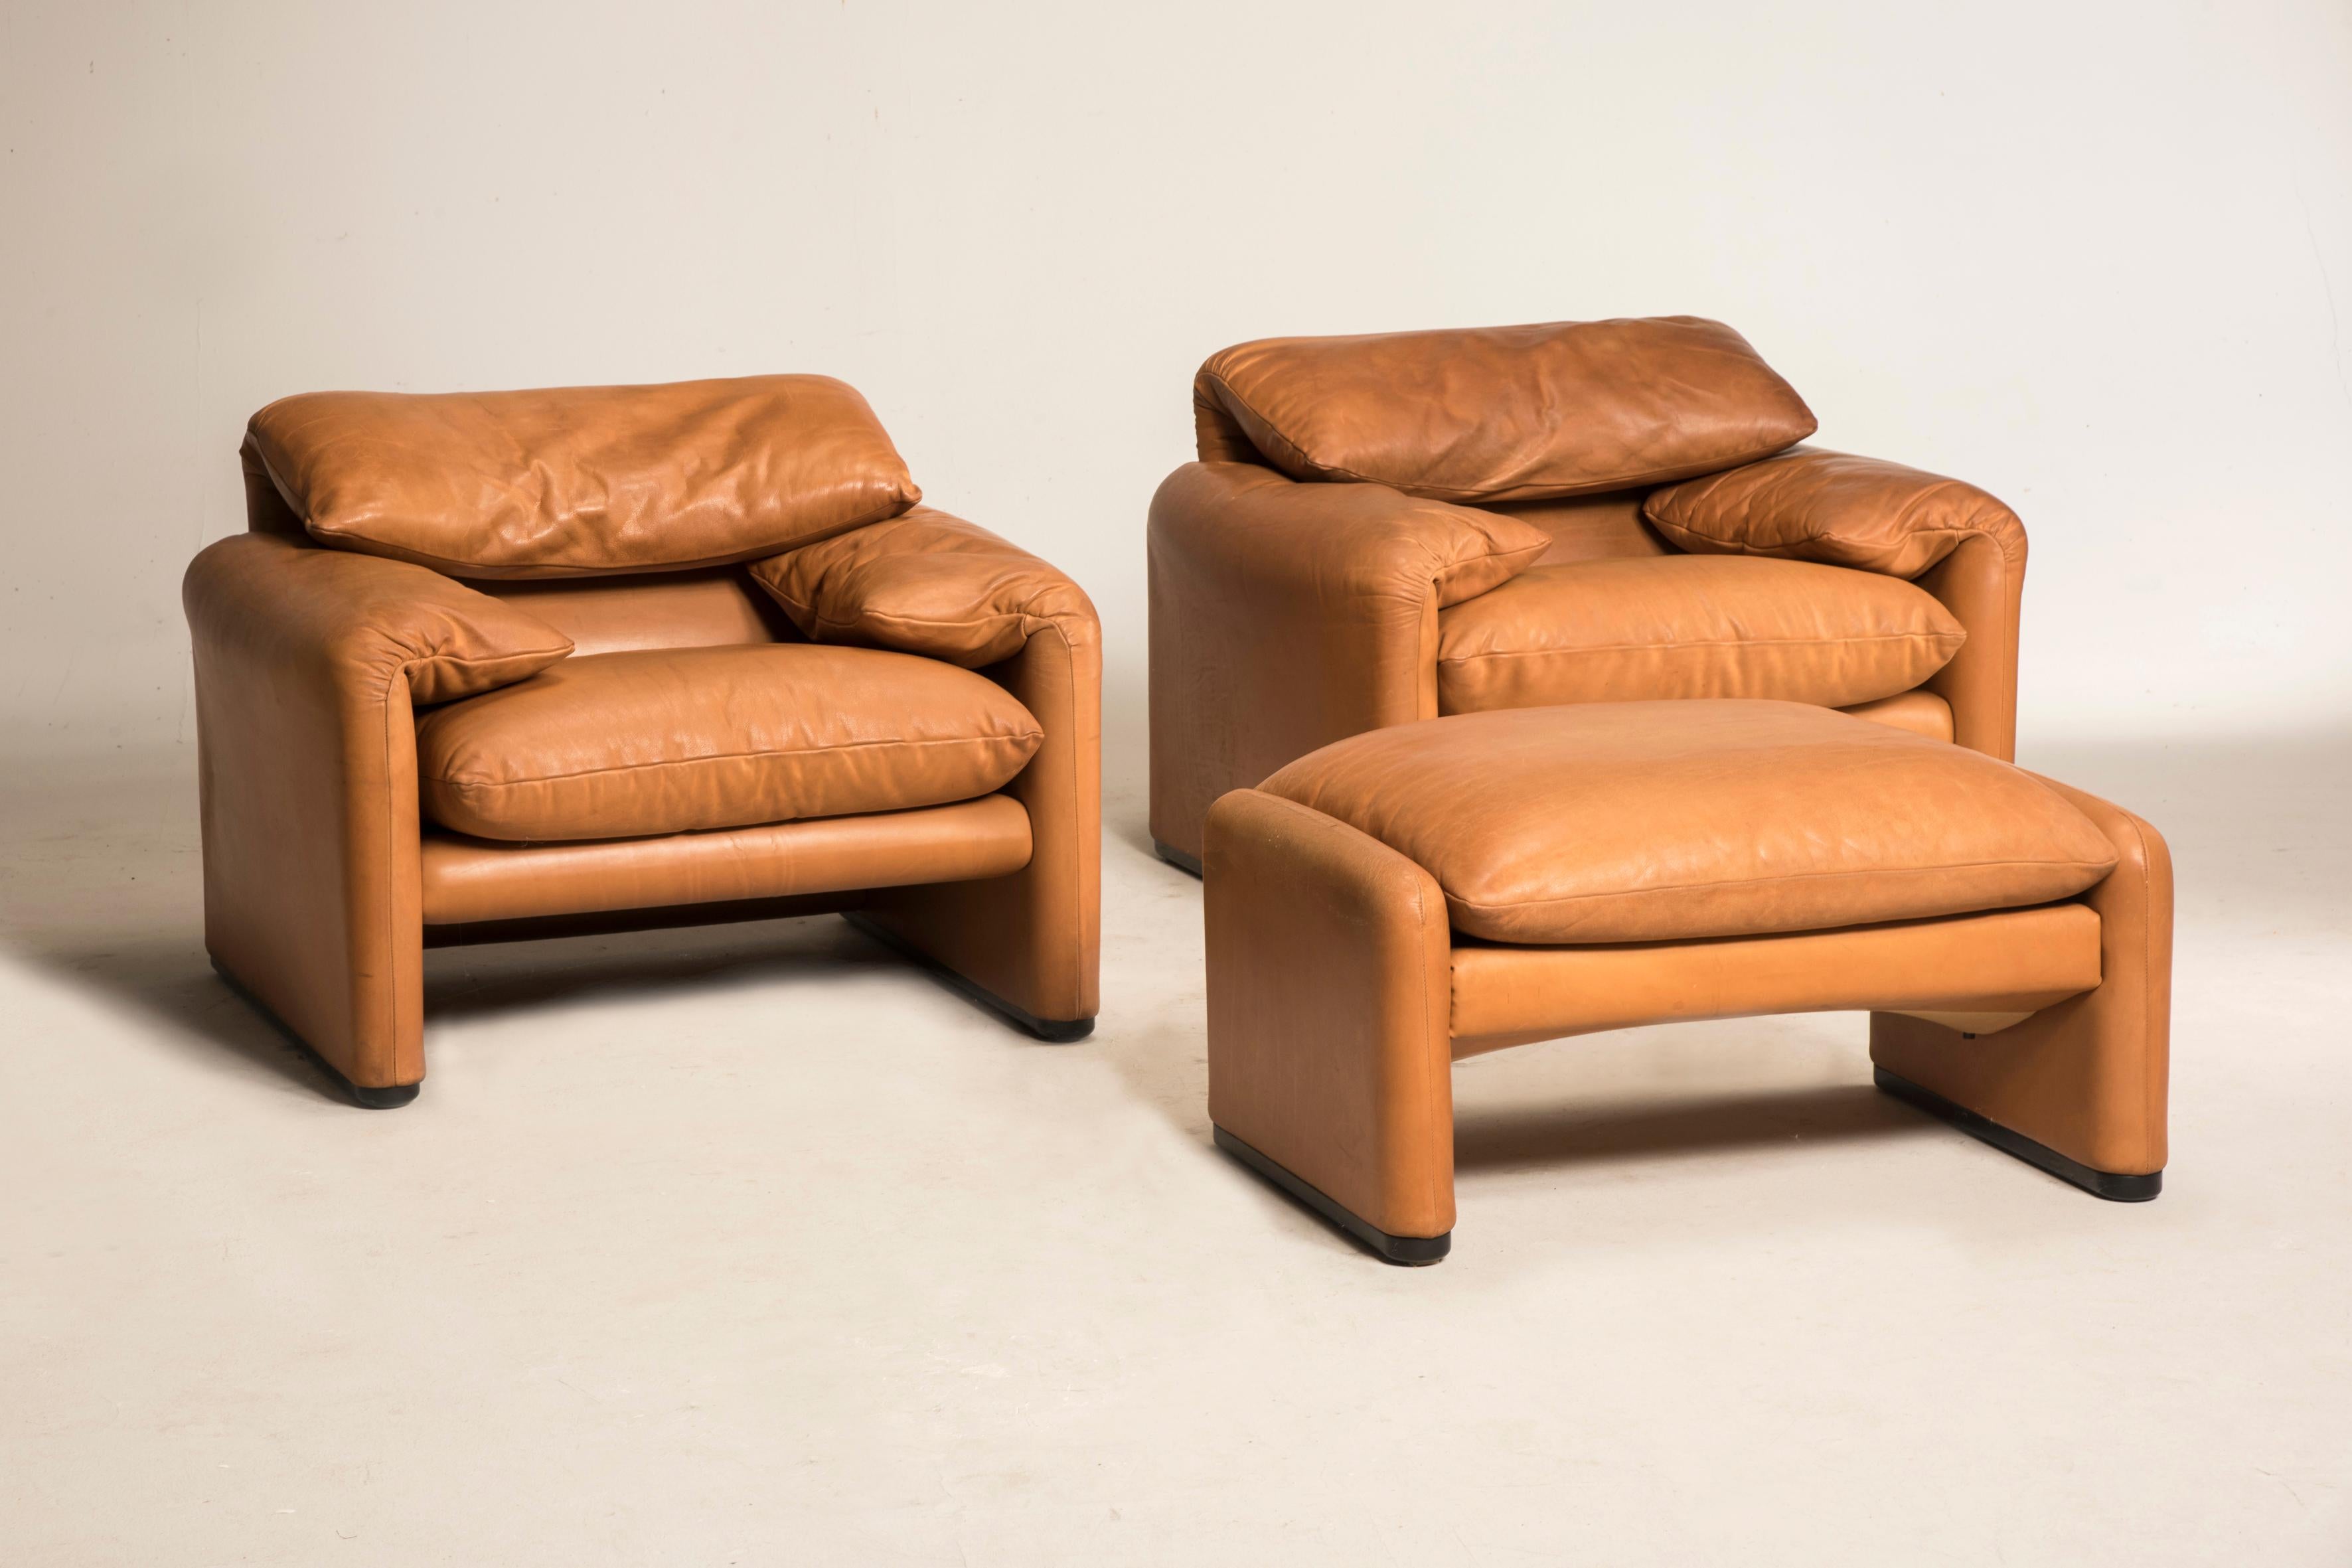 Two 675 Maralunga tobacco leather armchairs by Vico Magistretti for Cassina. We have four armchairs and a pouf available in total, you can buy the entire group of five items or you can divide the group into two armchairs and a pouf. Or the pouf